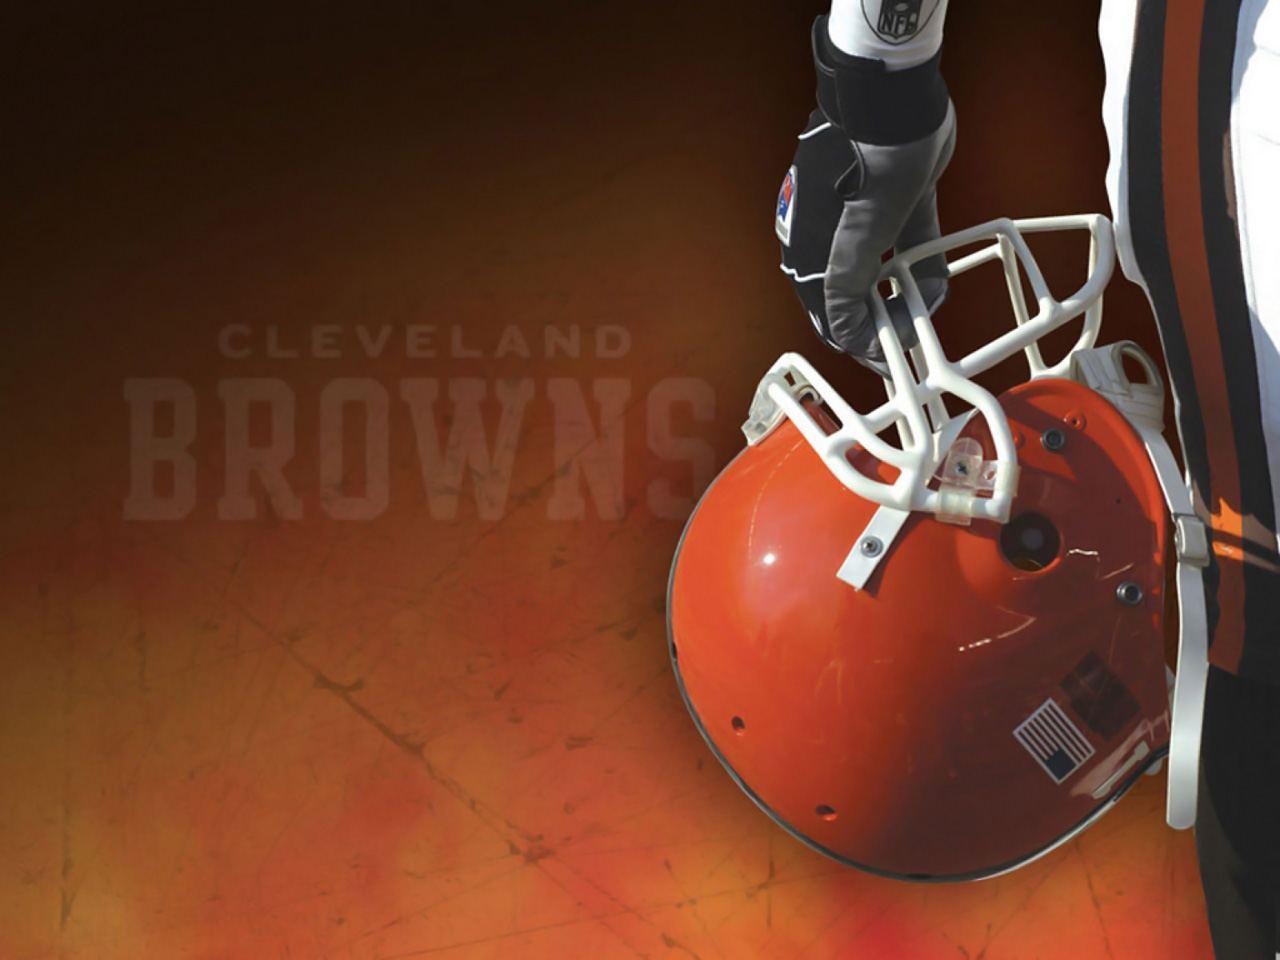 Cleveland Browns wallpapers hd free download